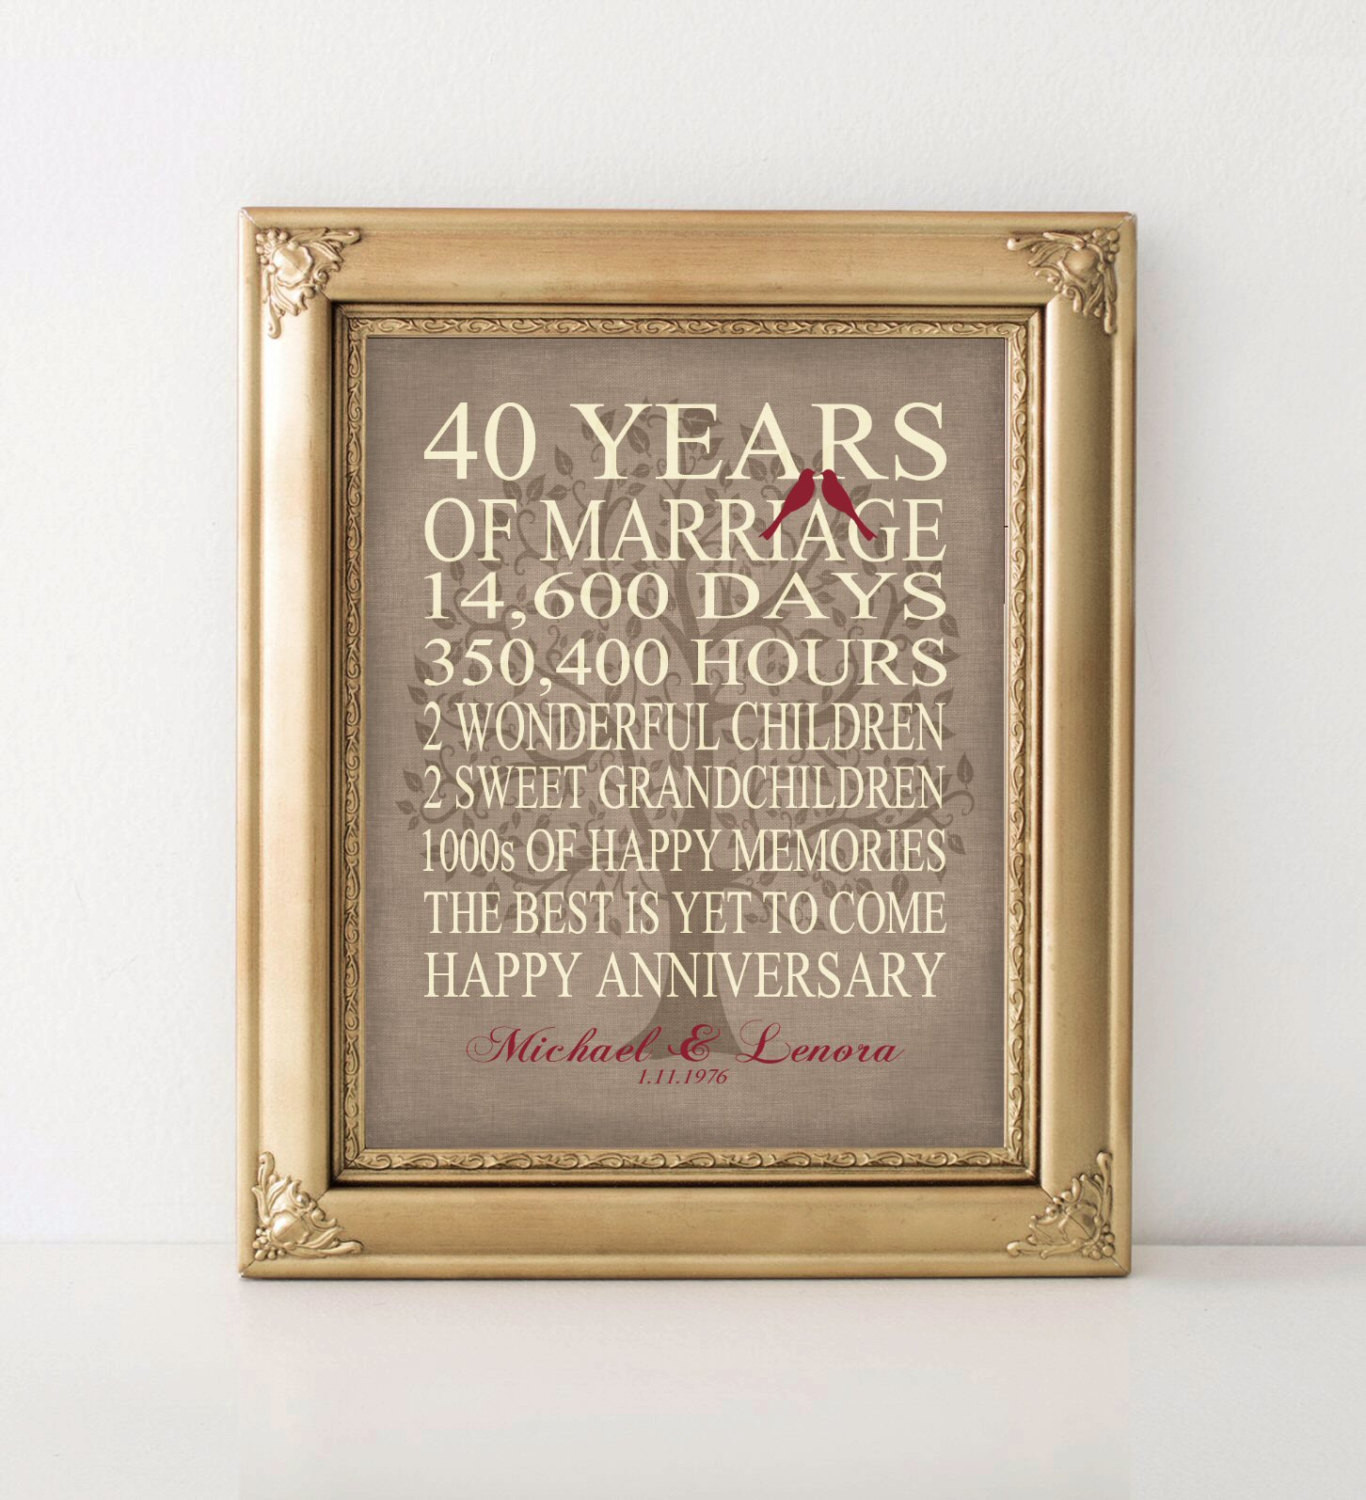 40Th Anniversary Gift Ideas For Couples
 Wedding Anniversary Gift 40th Anniversary Gift Personalized